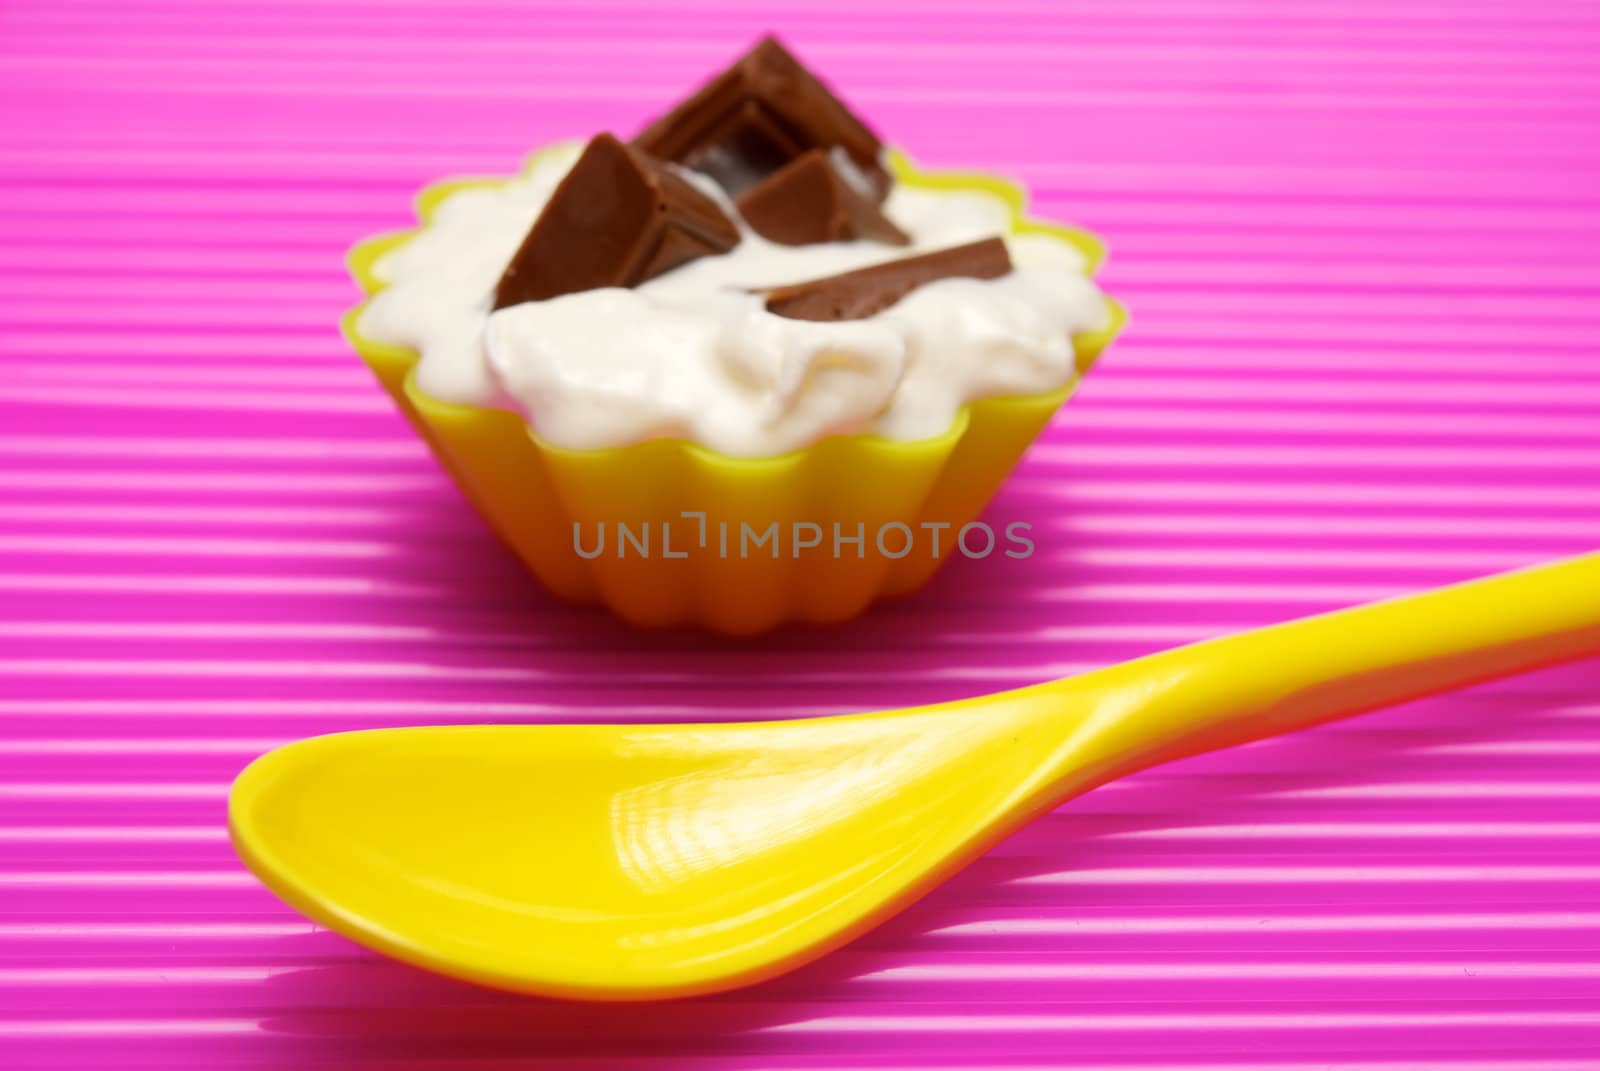 Empty yellow spoon with portion of whipped cream and chocolate over pink background. Shallow DOF